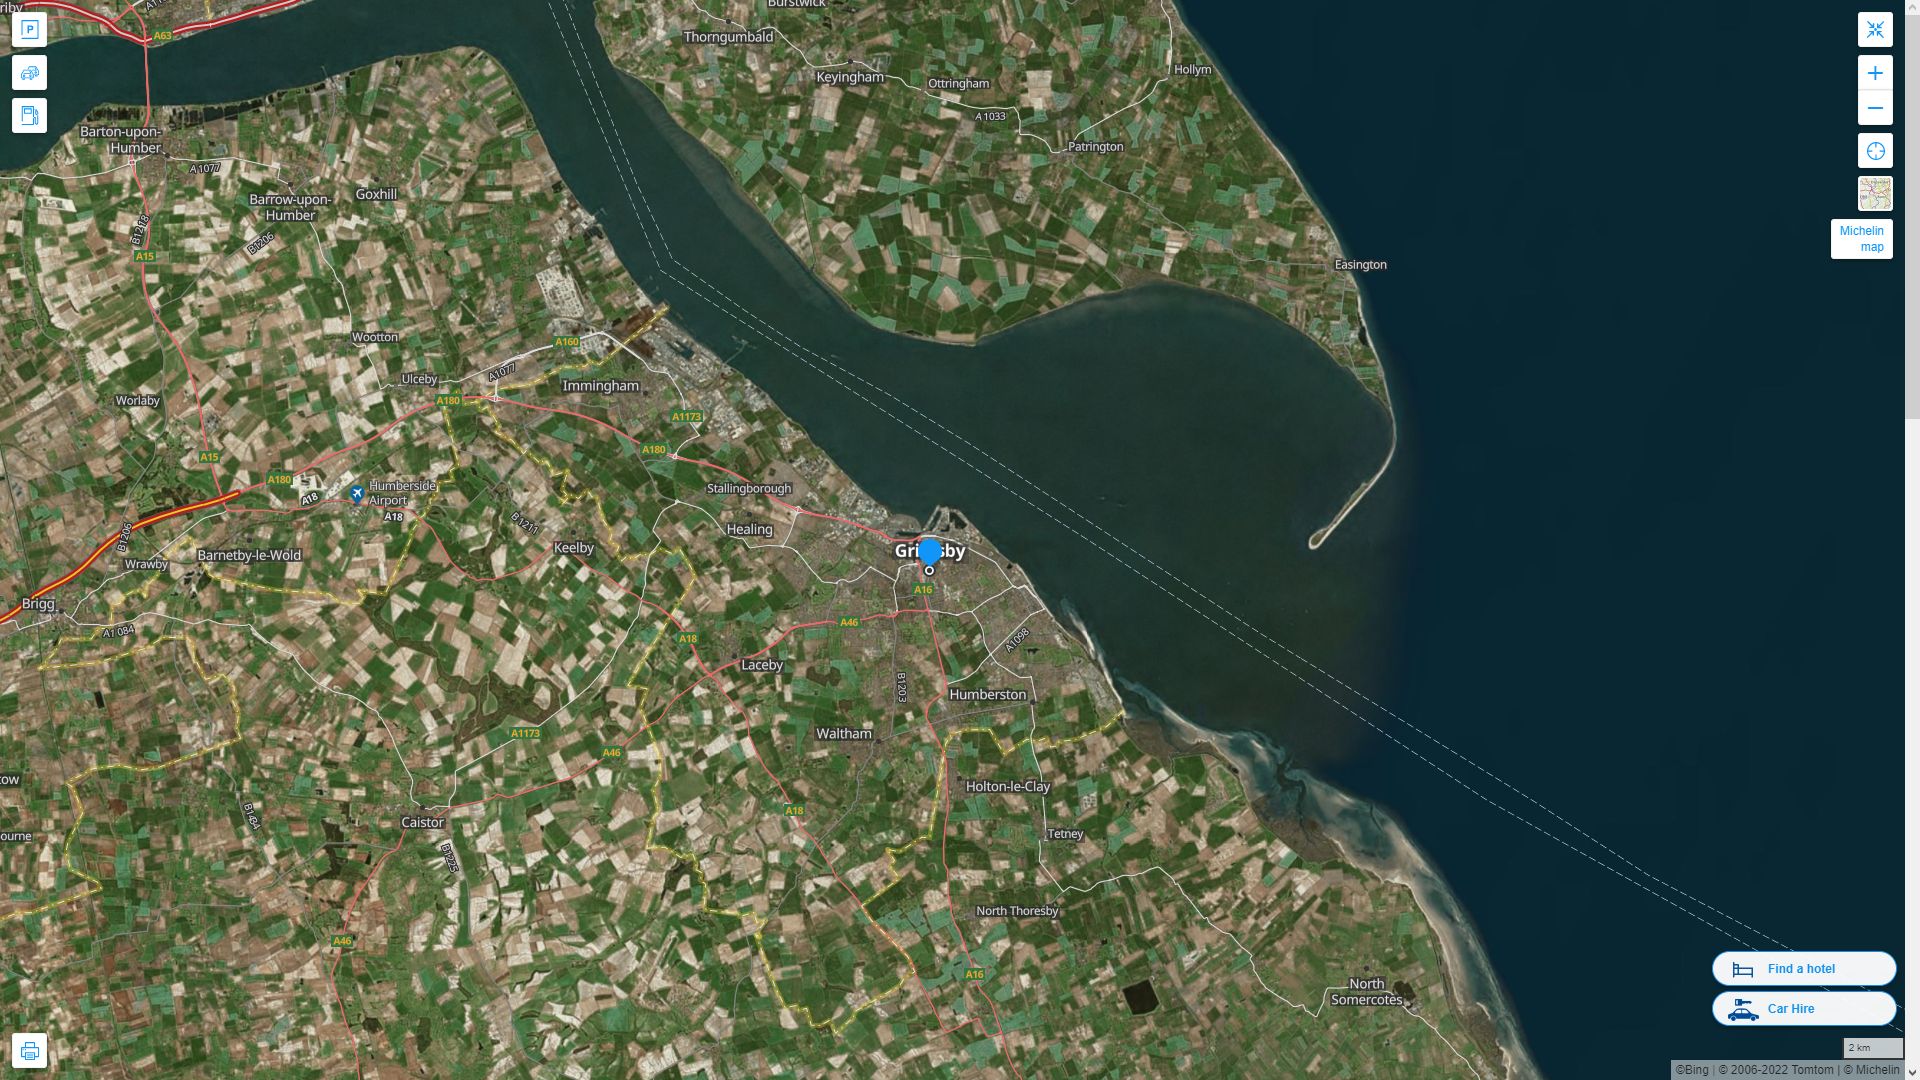 Grimsby Highway and Road Map with Satellite View